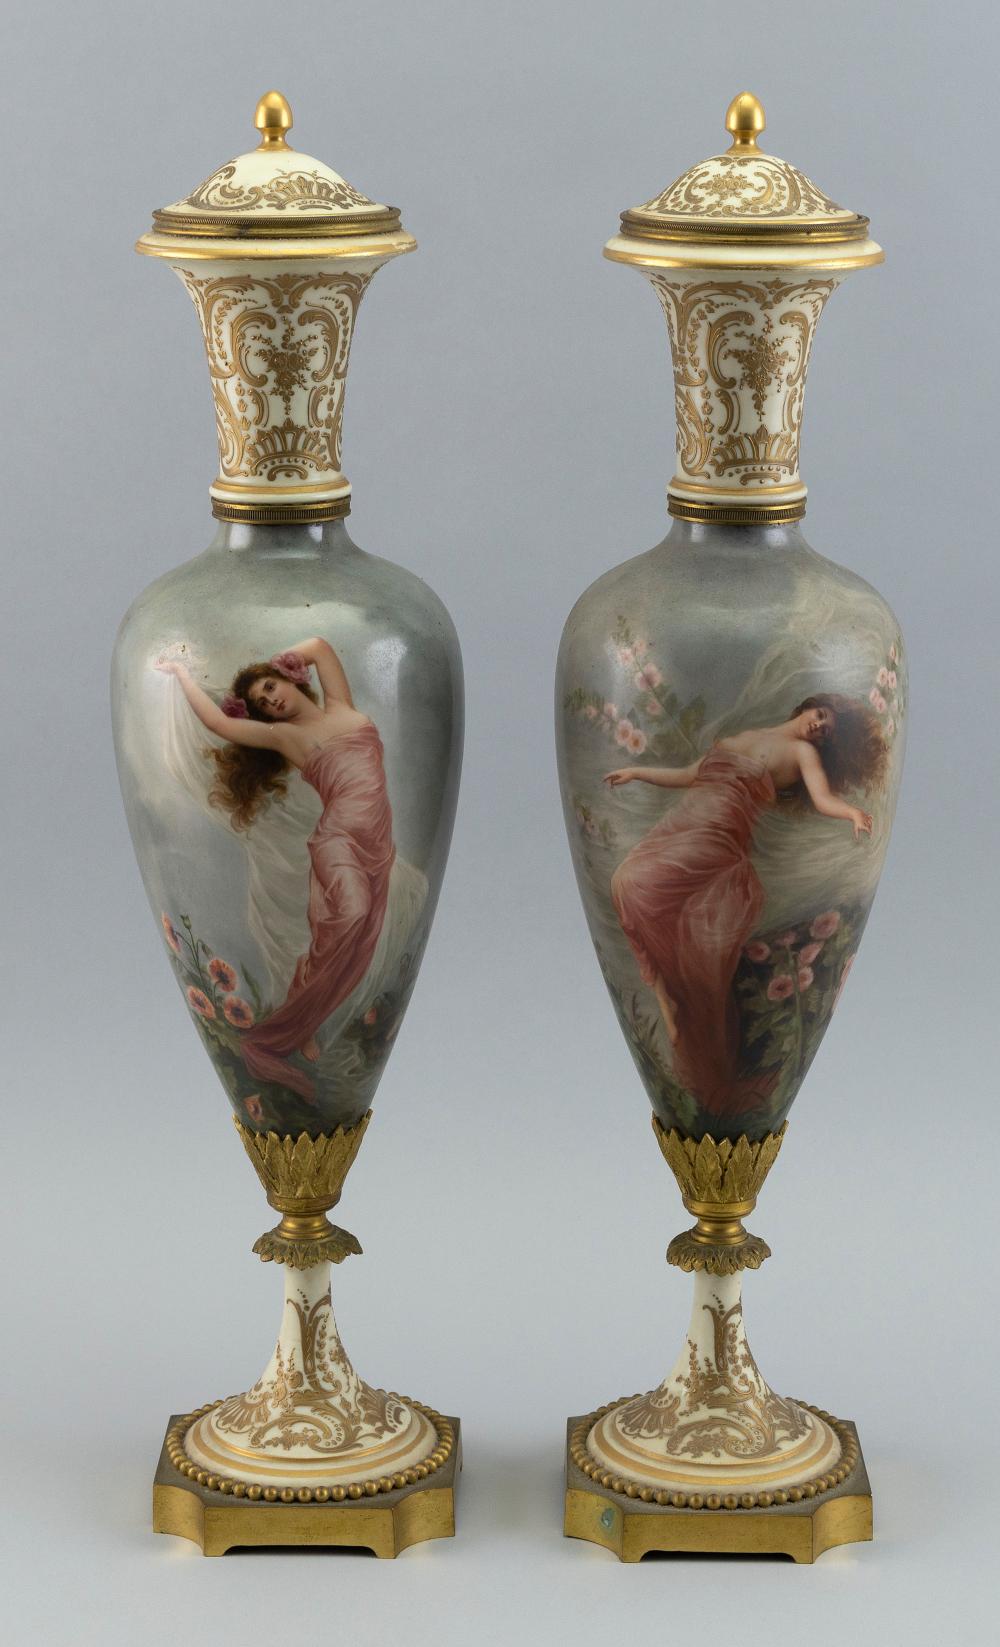 PAIR OF CONTINENTAL ORMOLU-MOUNTED